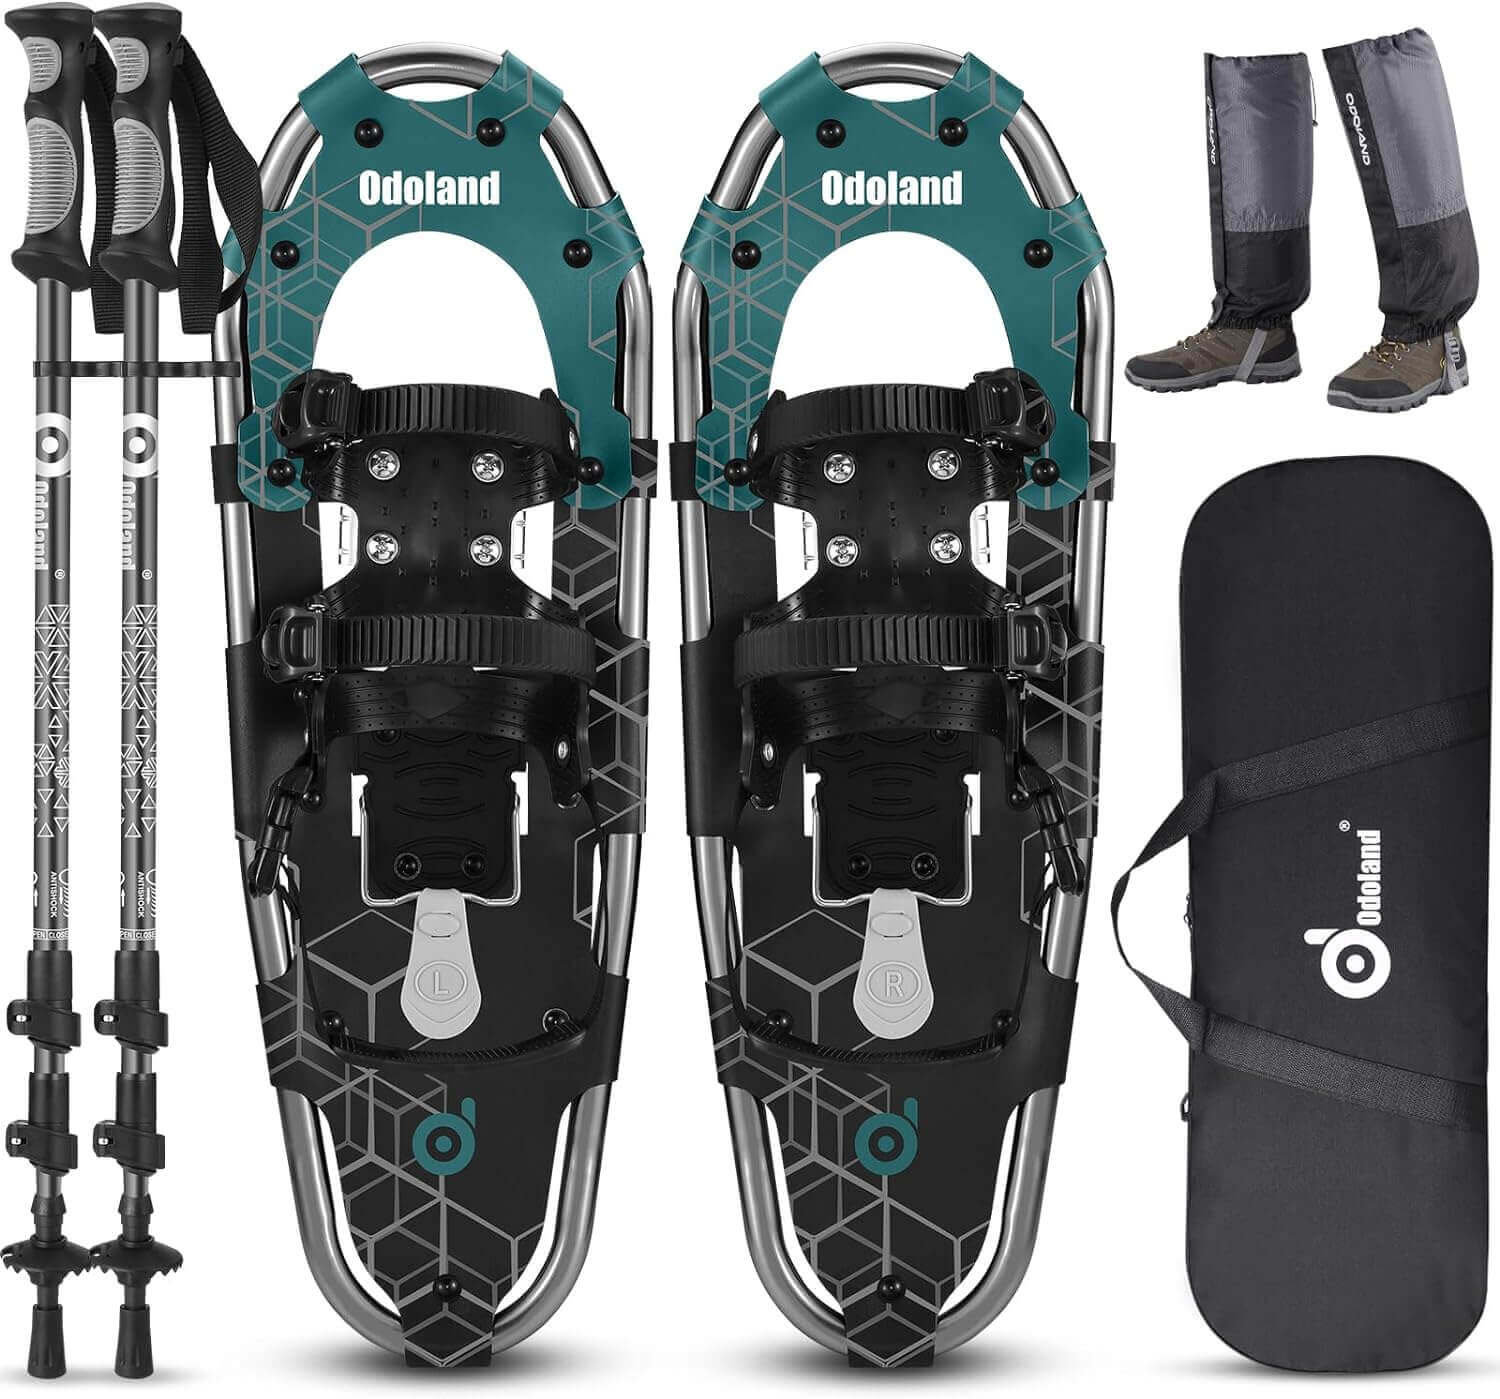 Shop The Latest >4-in-1 Snowshoes Set-Trekking Poles, Snow Leg Gaiters & Bag > *Only $133.64*> From The Top Brand > *Odolandl* > Shop Now and Get Free Shipping On Orders Over $45.00 >*Shop Earth Foot*